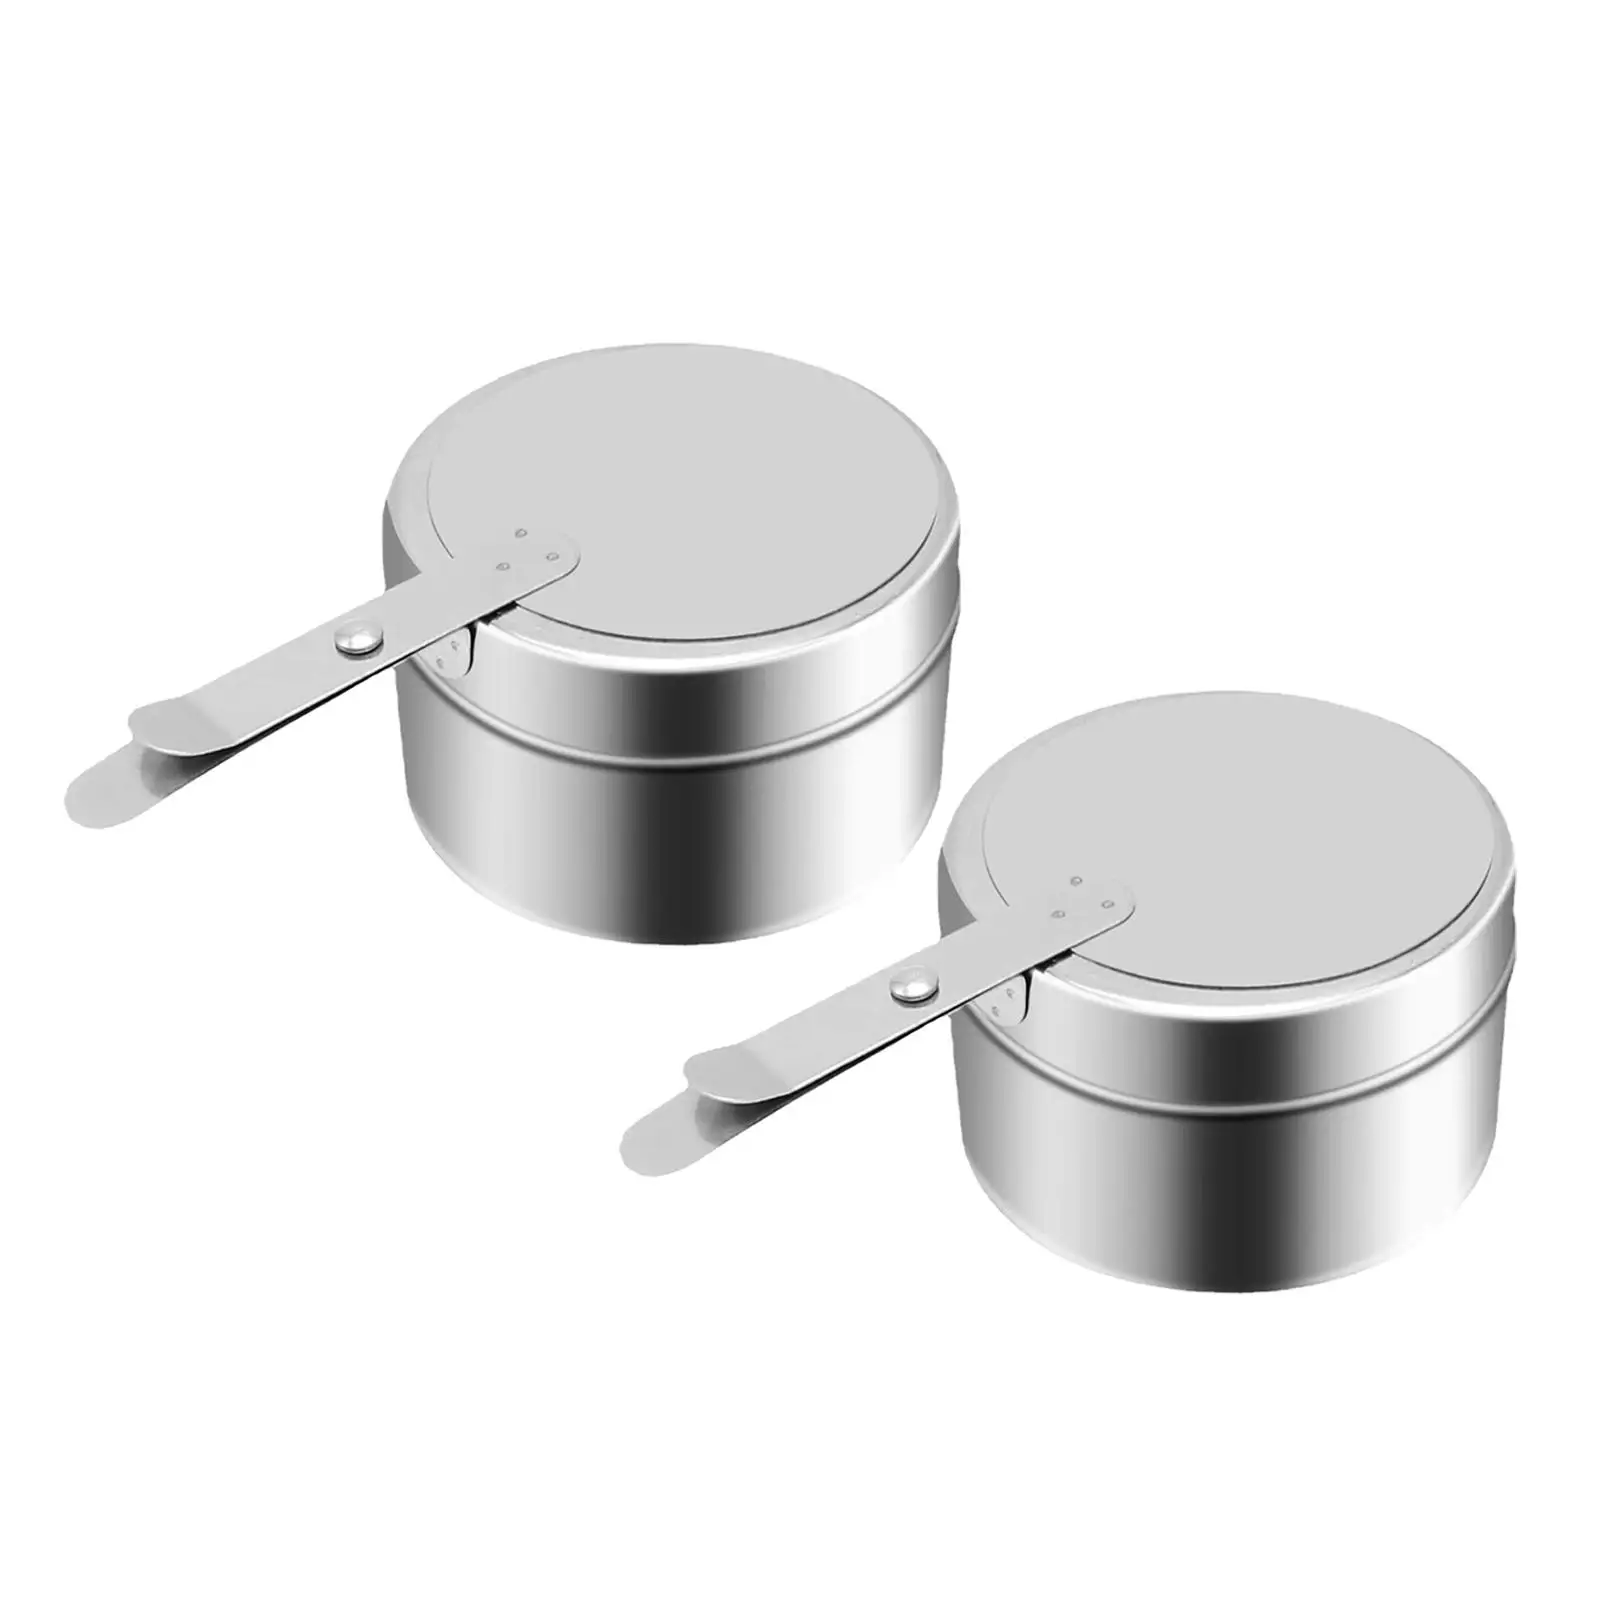 2 Pieces Buffet Warmer Fuel Holder Canned Fuel Boxes Parties Fuel Cans Holder Set for Catering Events Warmer Party